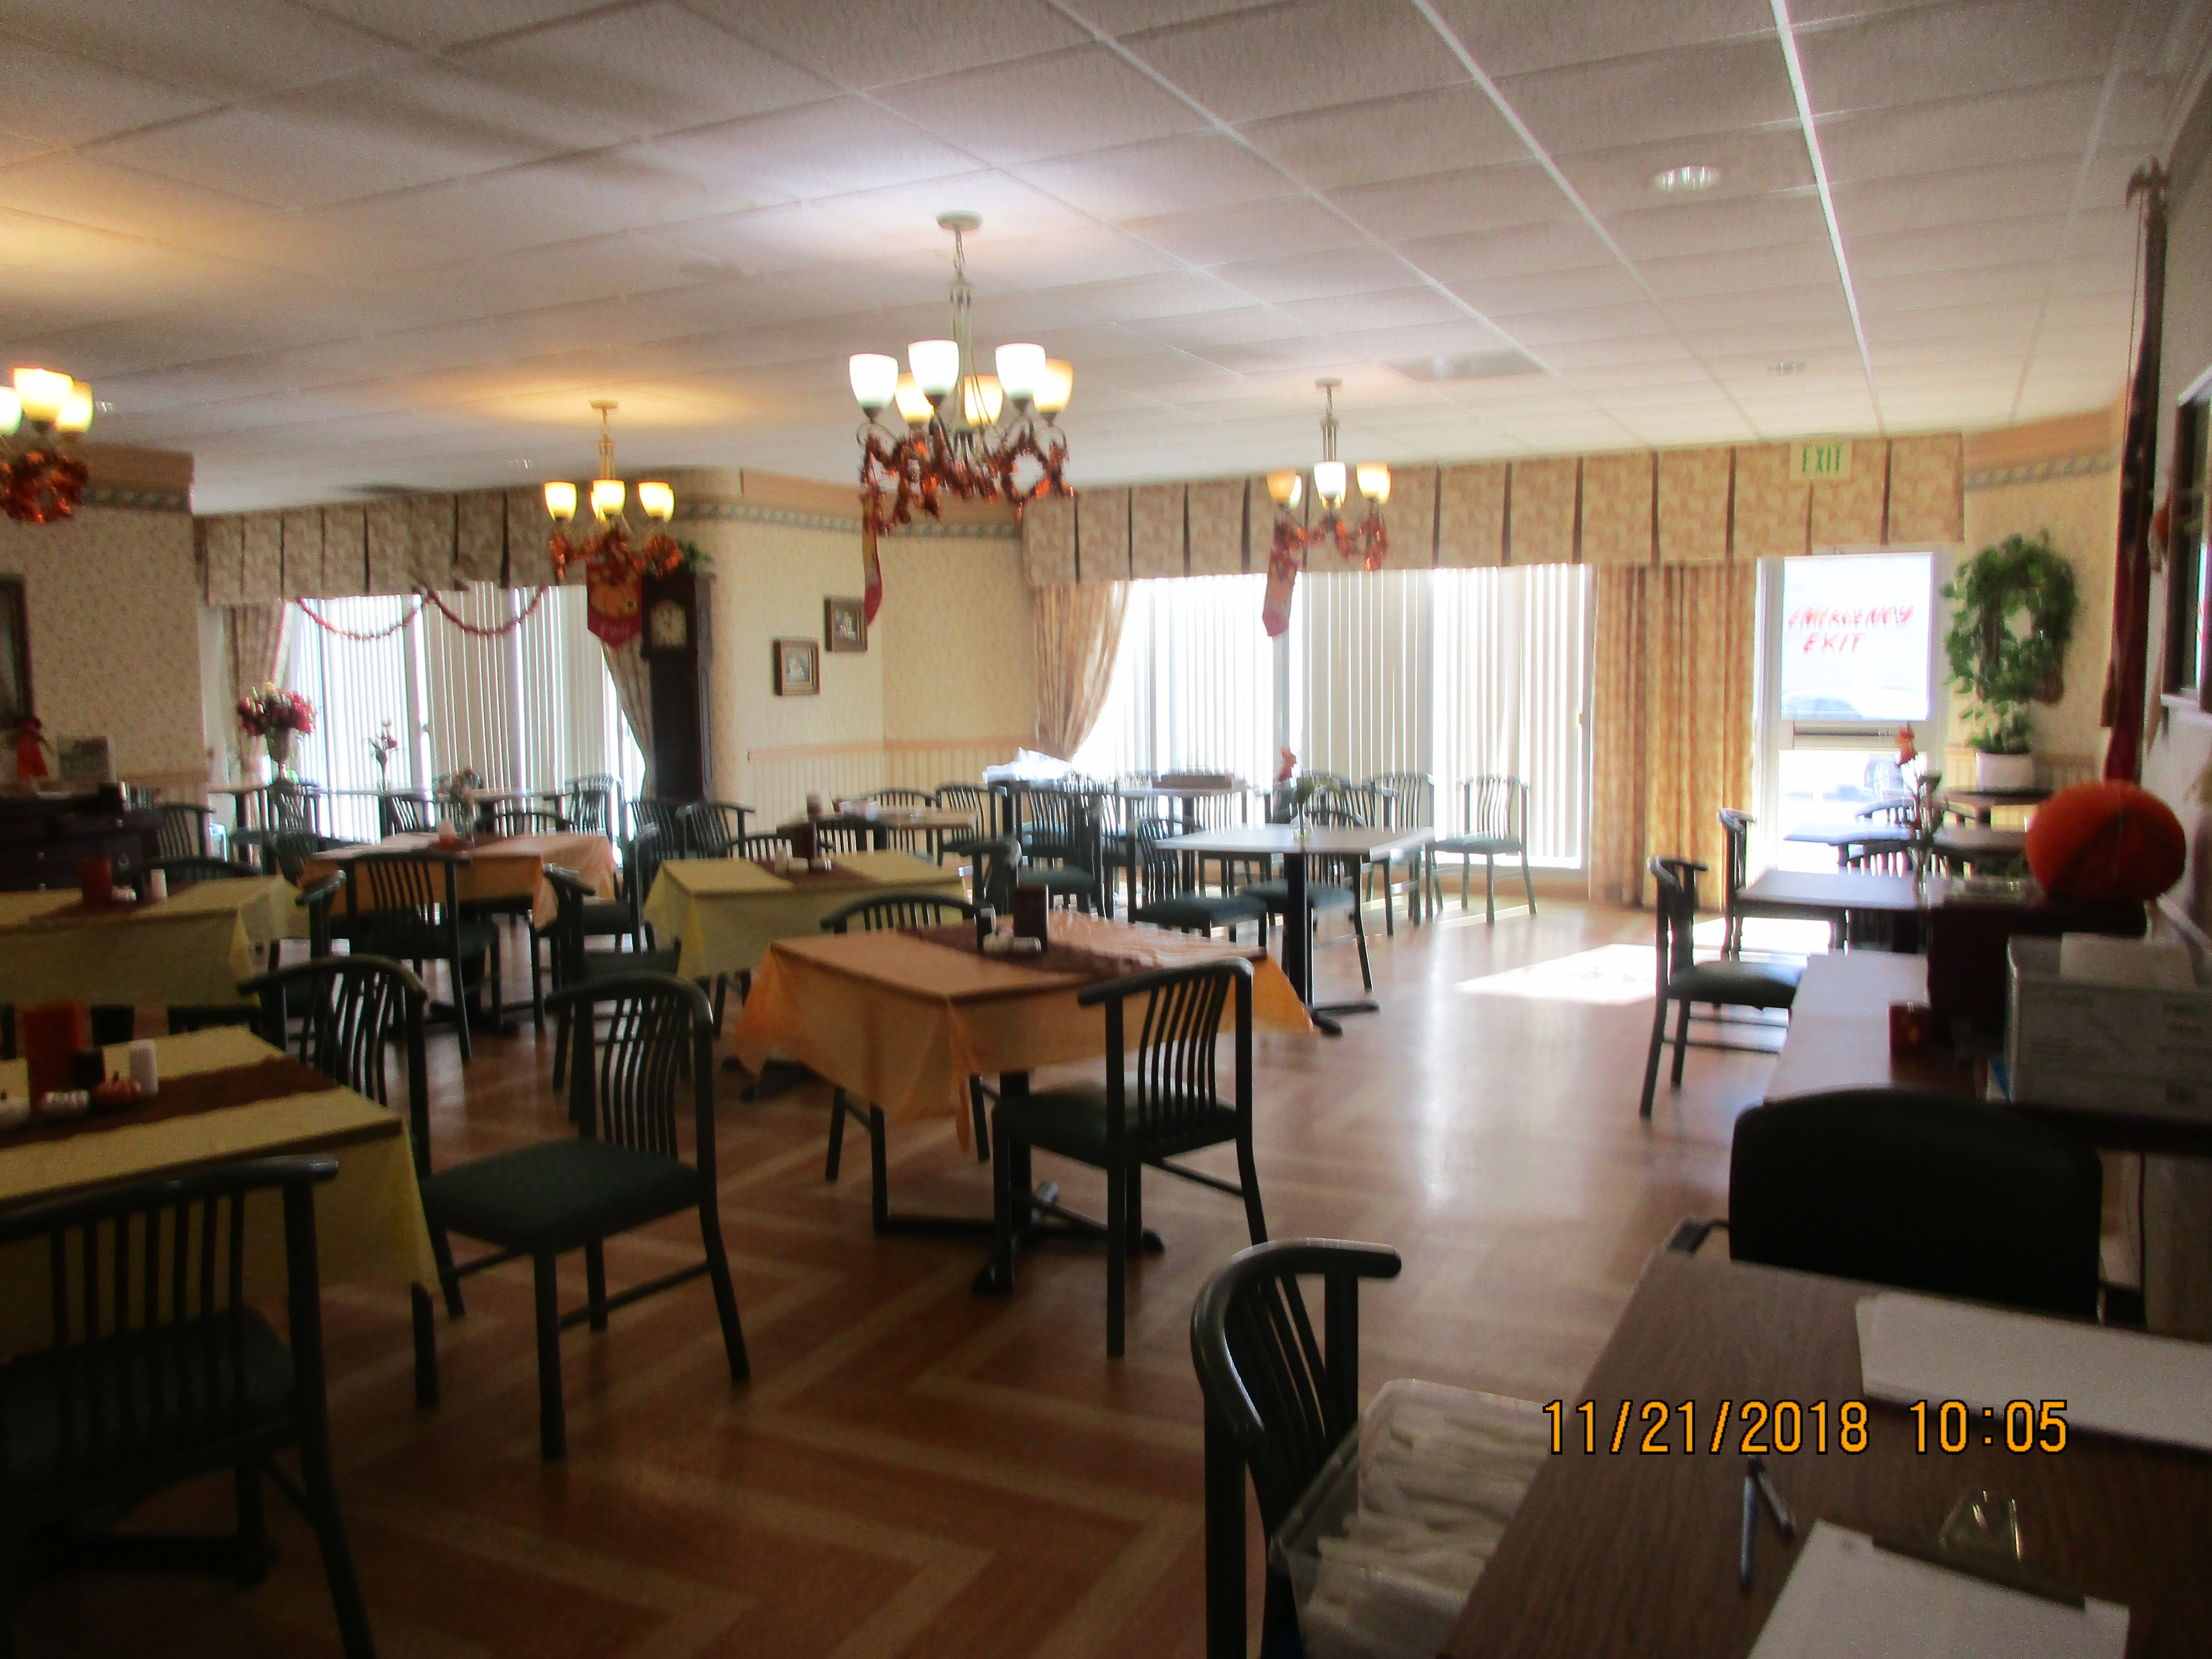 Inside view of the dining room equipped with tables and chairs